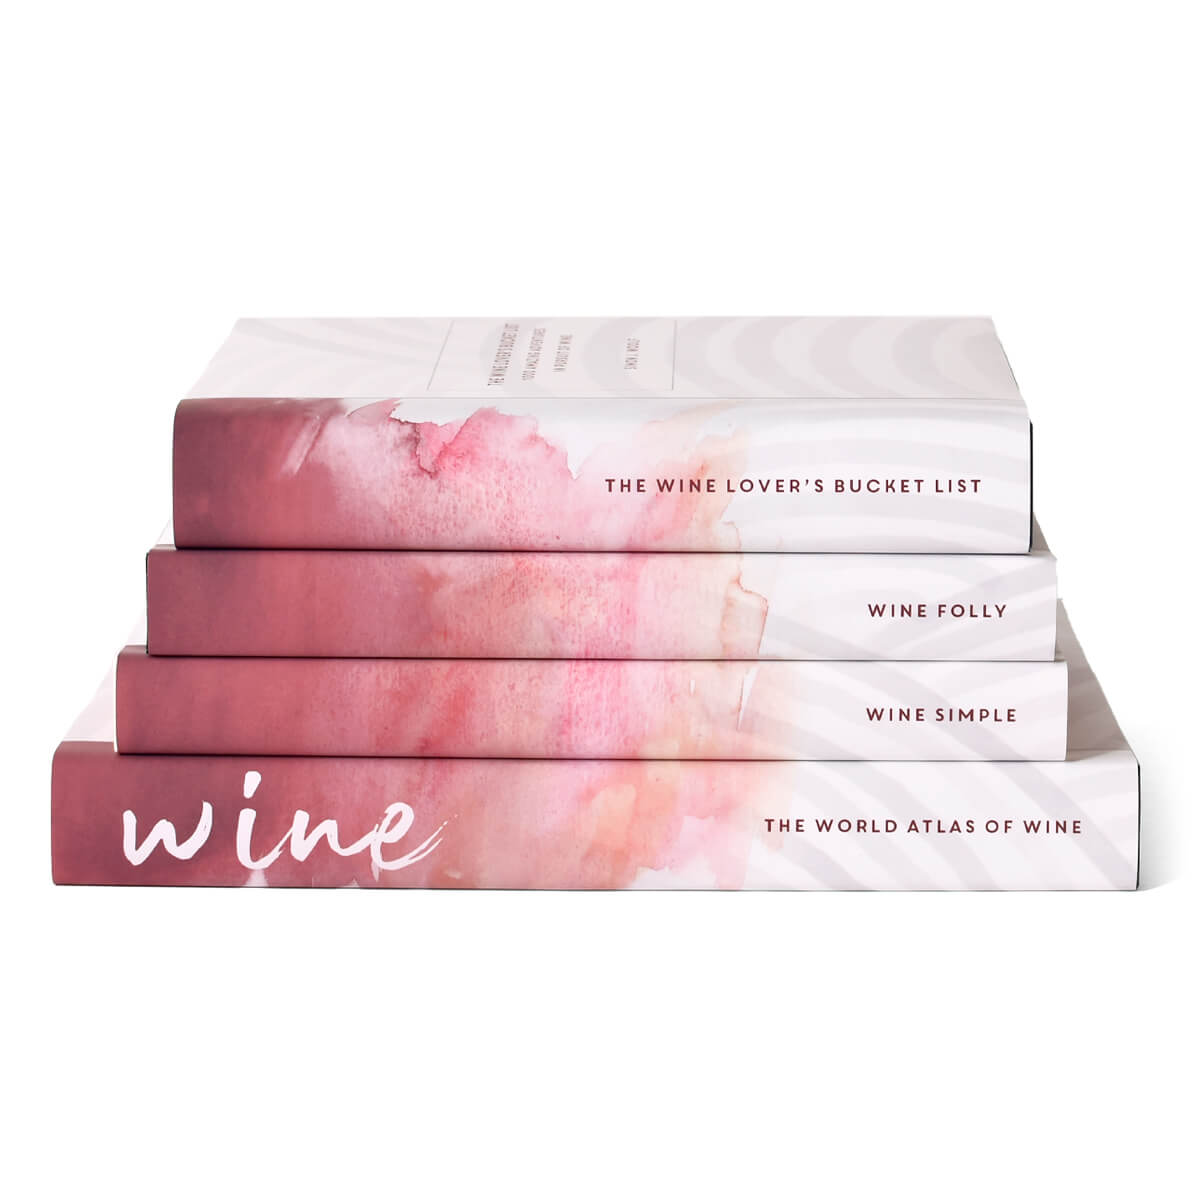 Customizable Book Set for Wine Lovers. Makes a perfect gift or spruces up your shelves, great coffee table books.